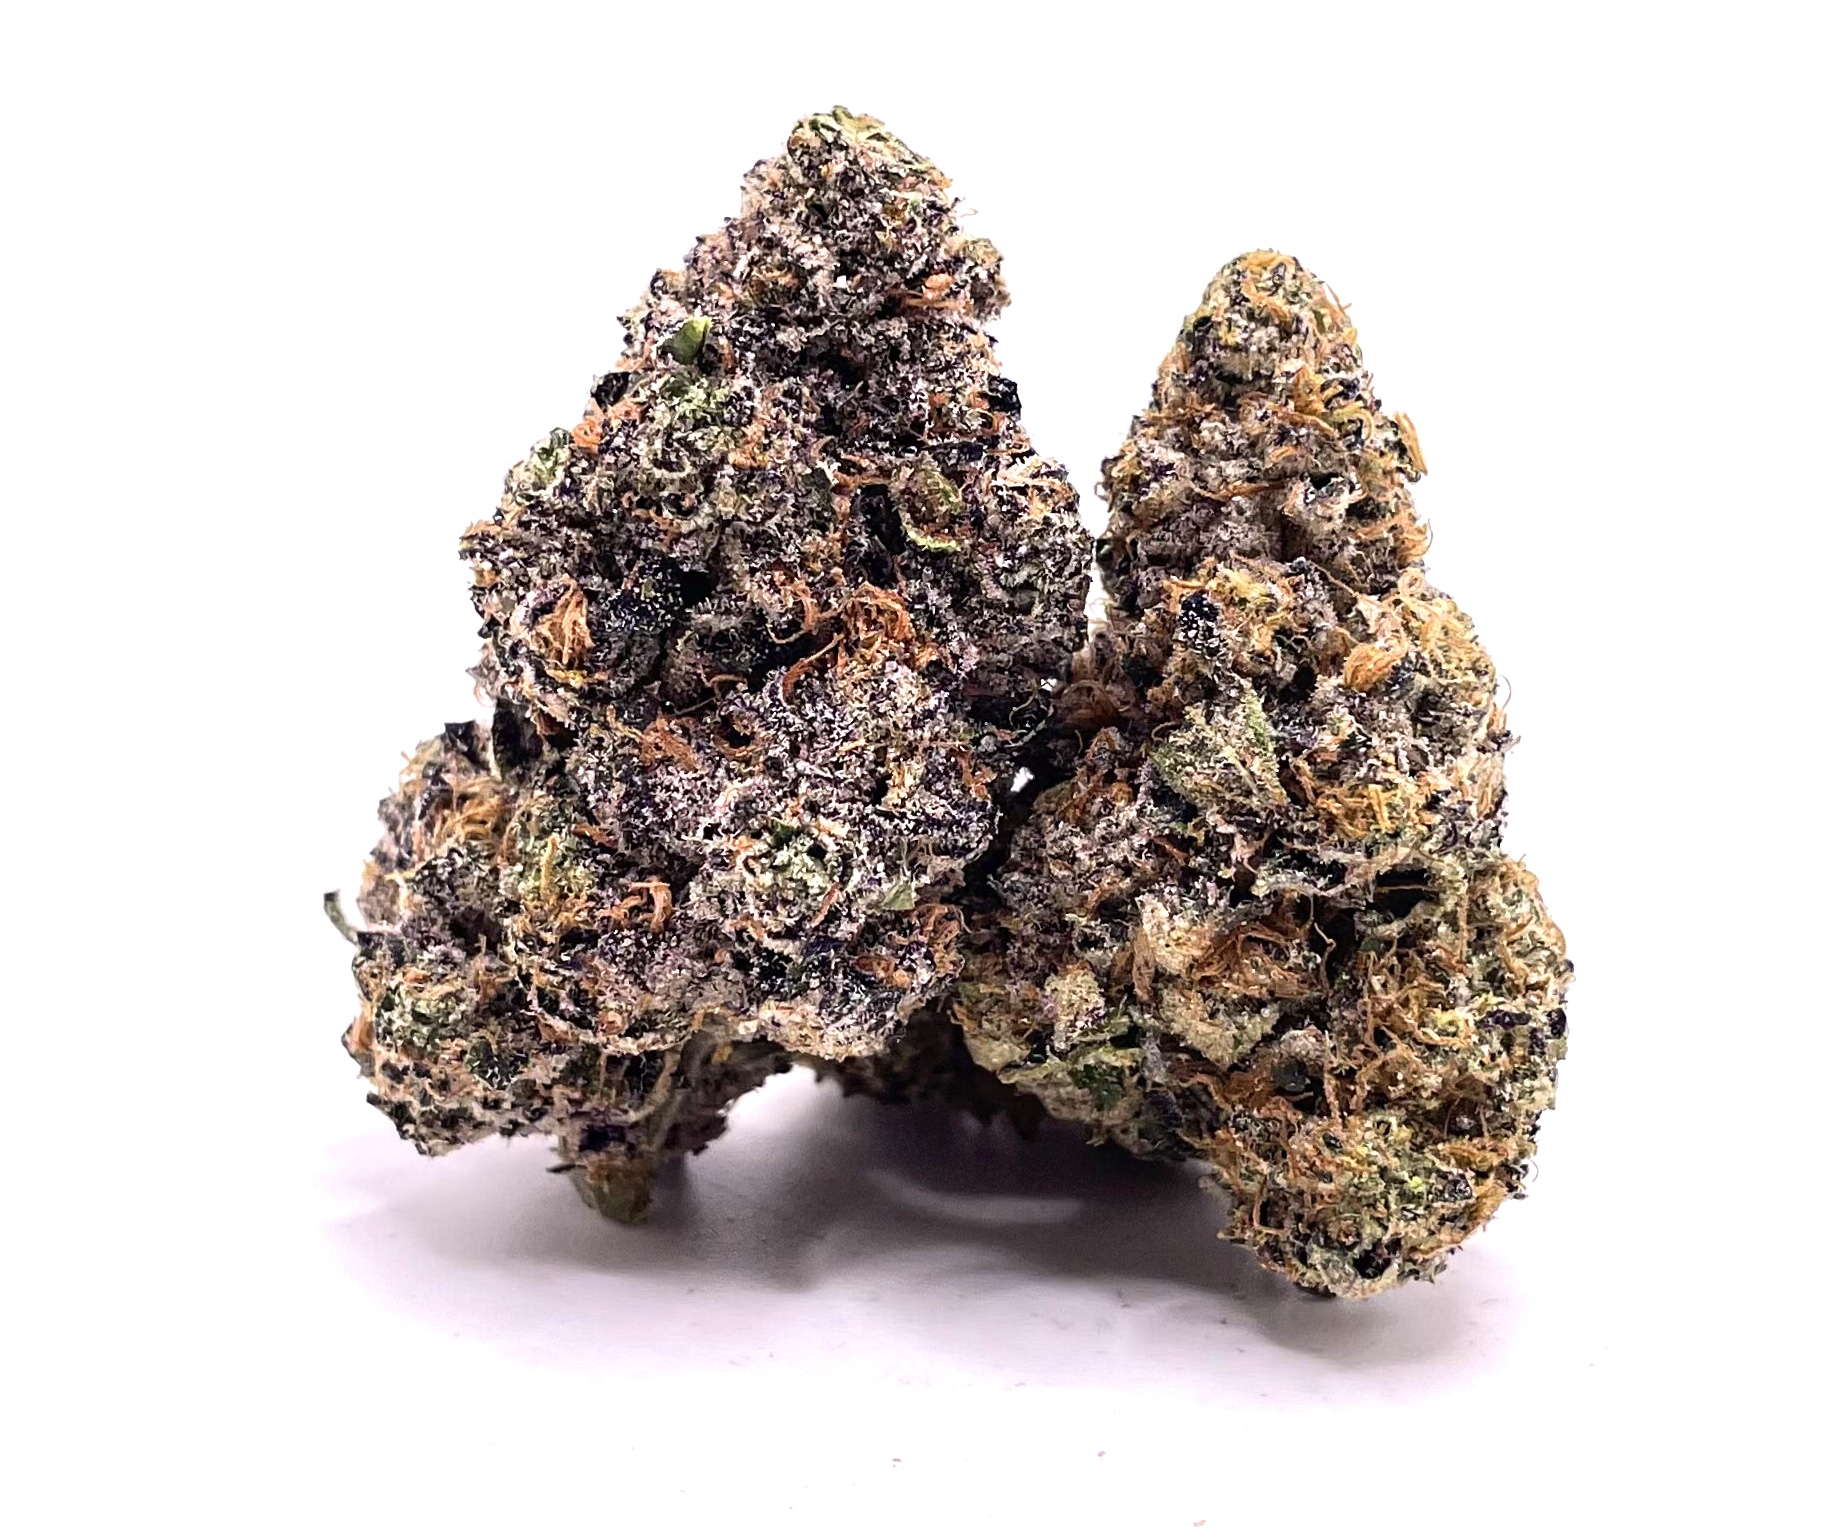 Red Viper x Sherbanger – 4gs for $45 *Private Reserve $225 OZ Special*